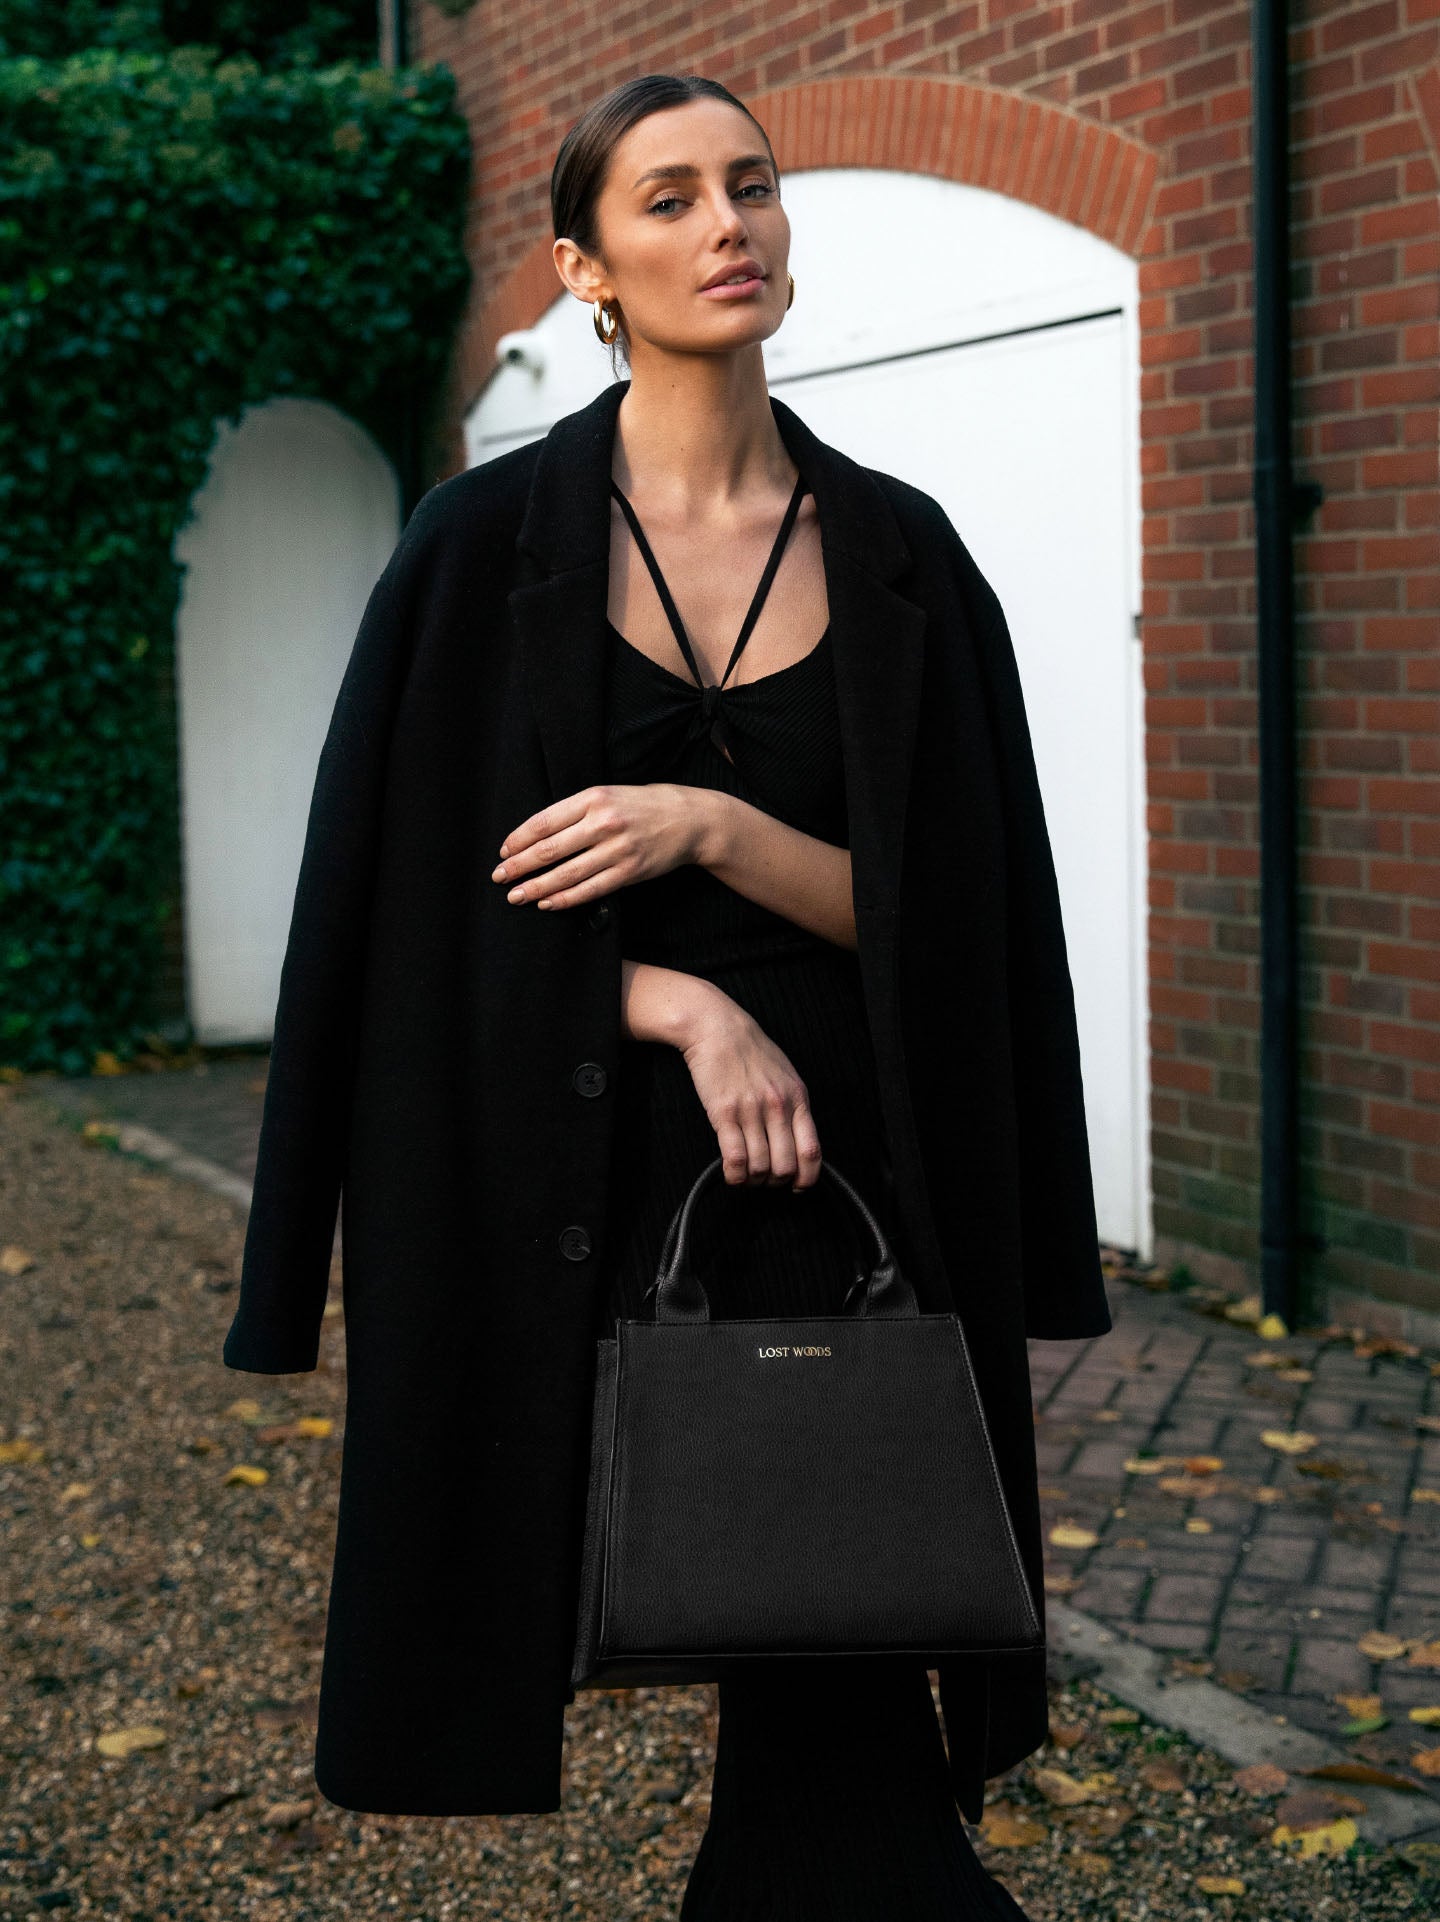 Ebony Structured Tote Bag in Black & Gold